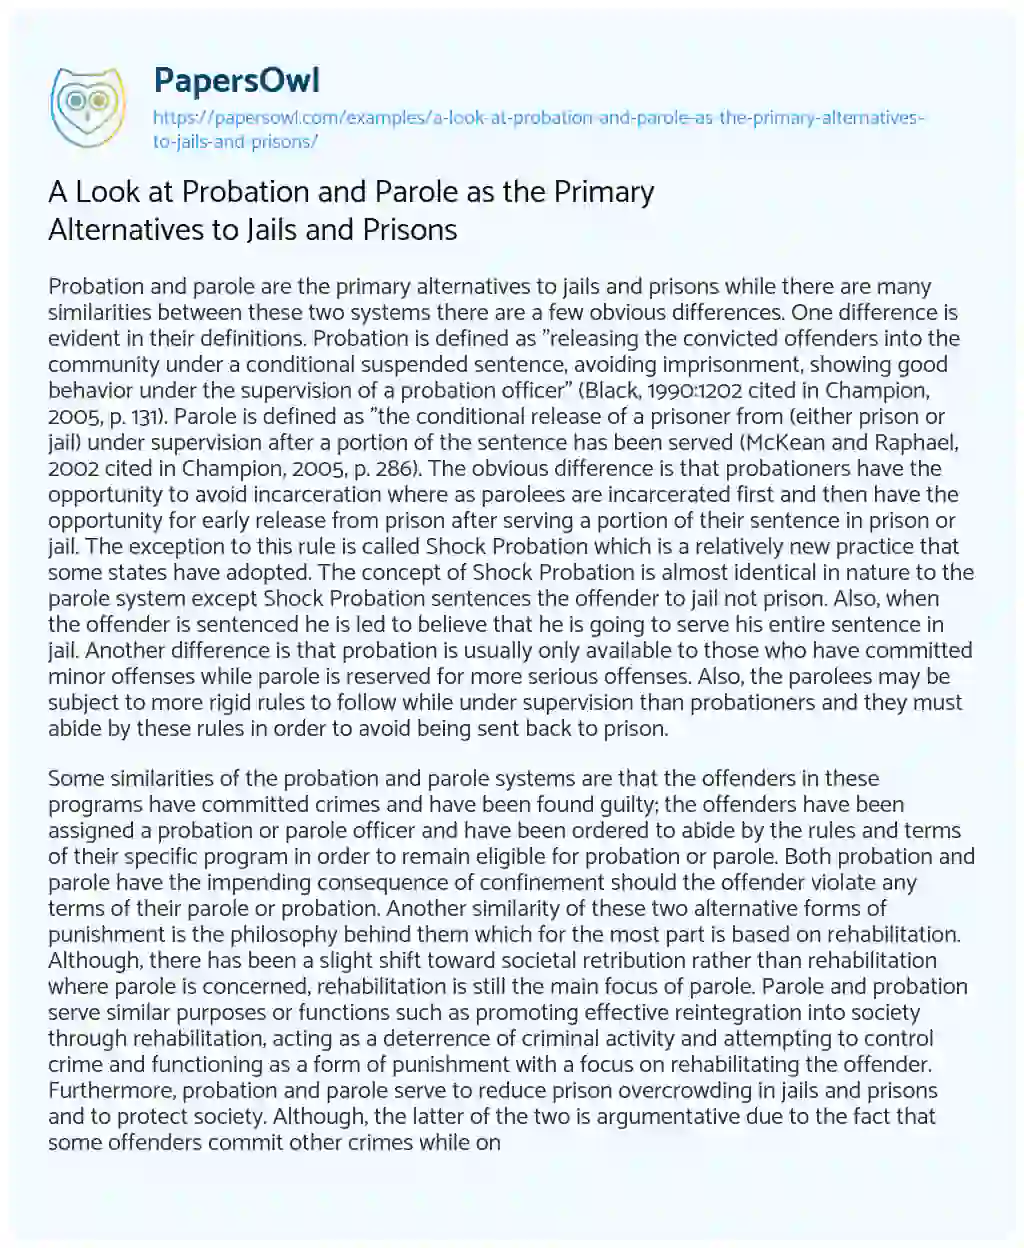 Essay on A Look at Probation and Parole as the Primary Alternatives to Jails and Prisons